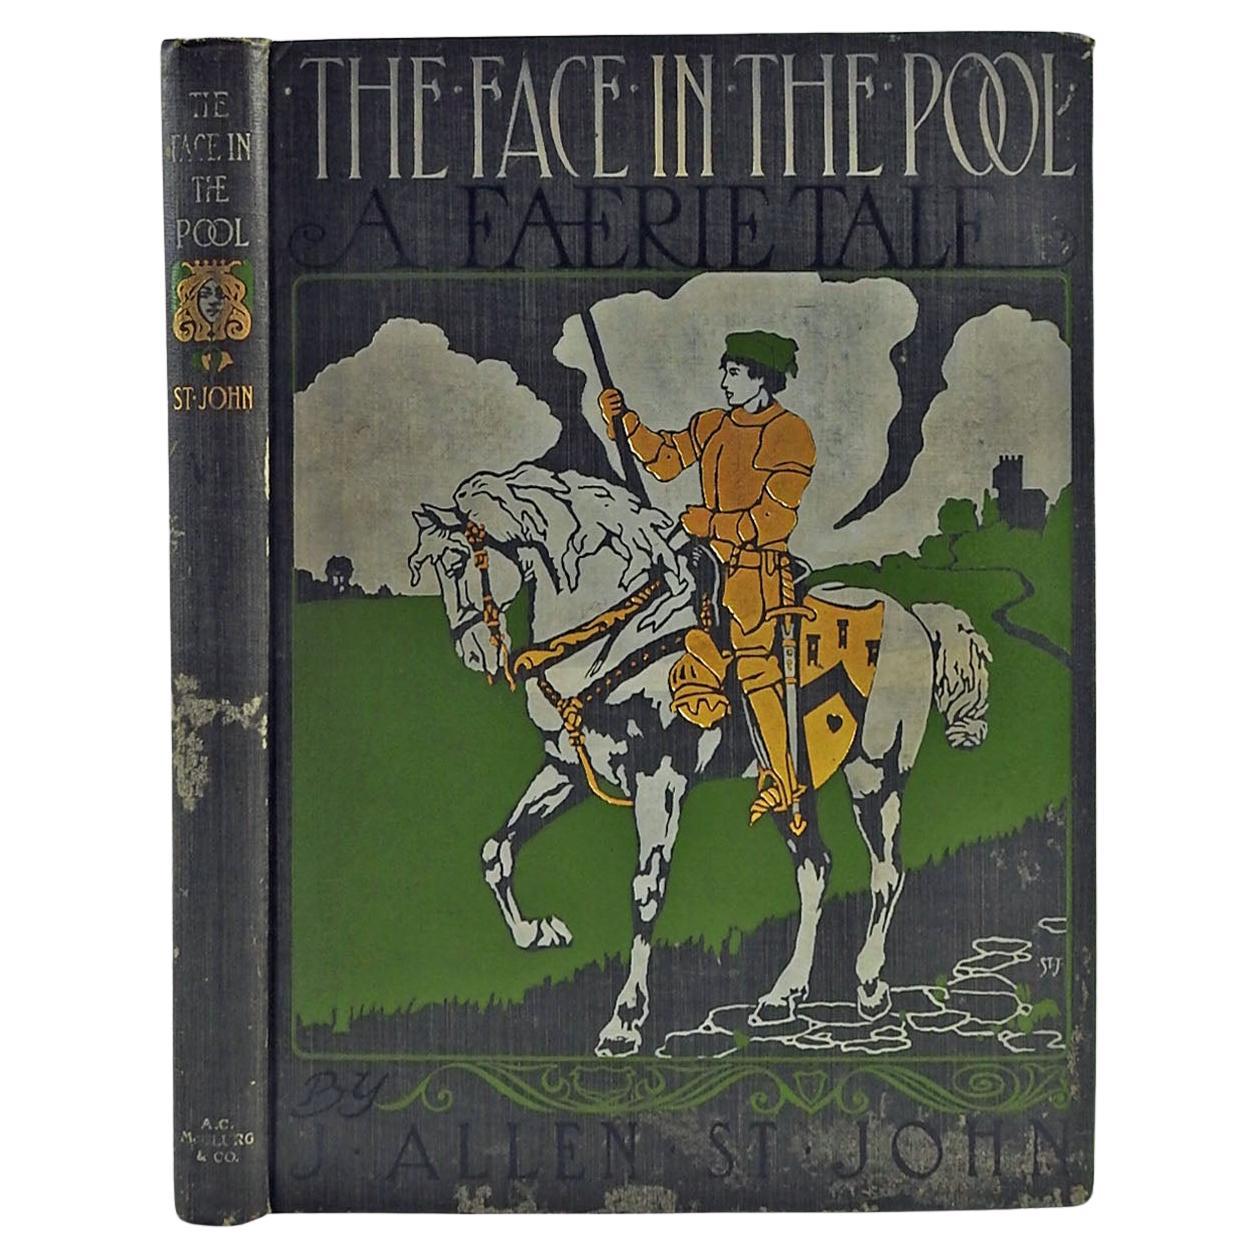 1905 « The Face in the Pool a Faerie Tale Book »